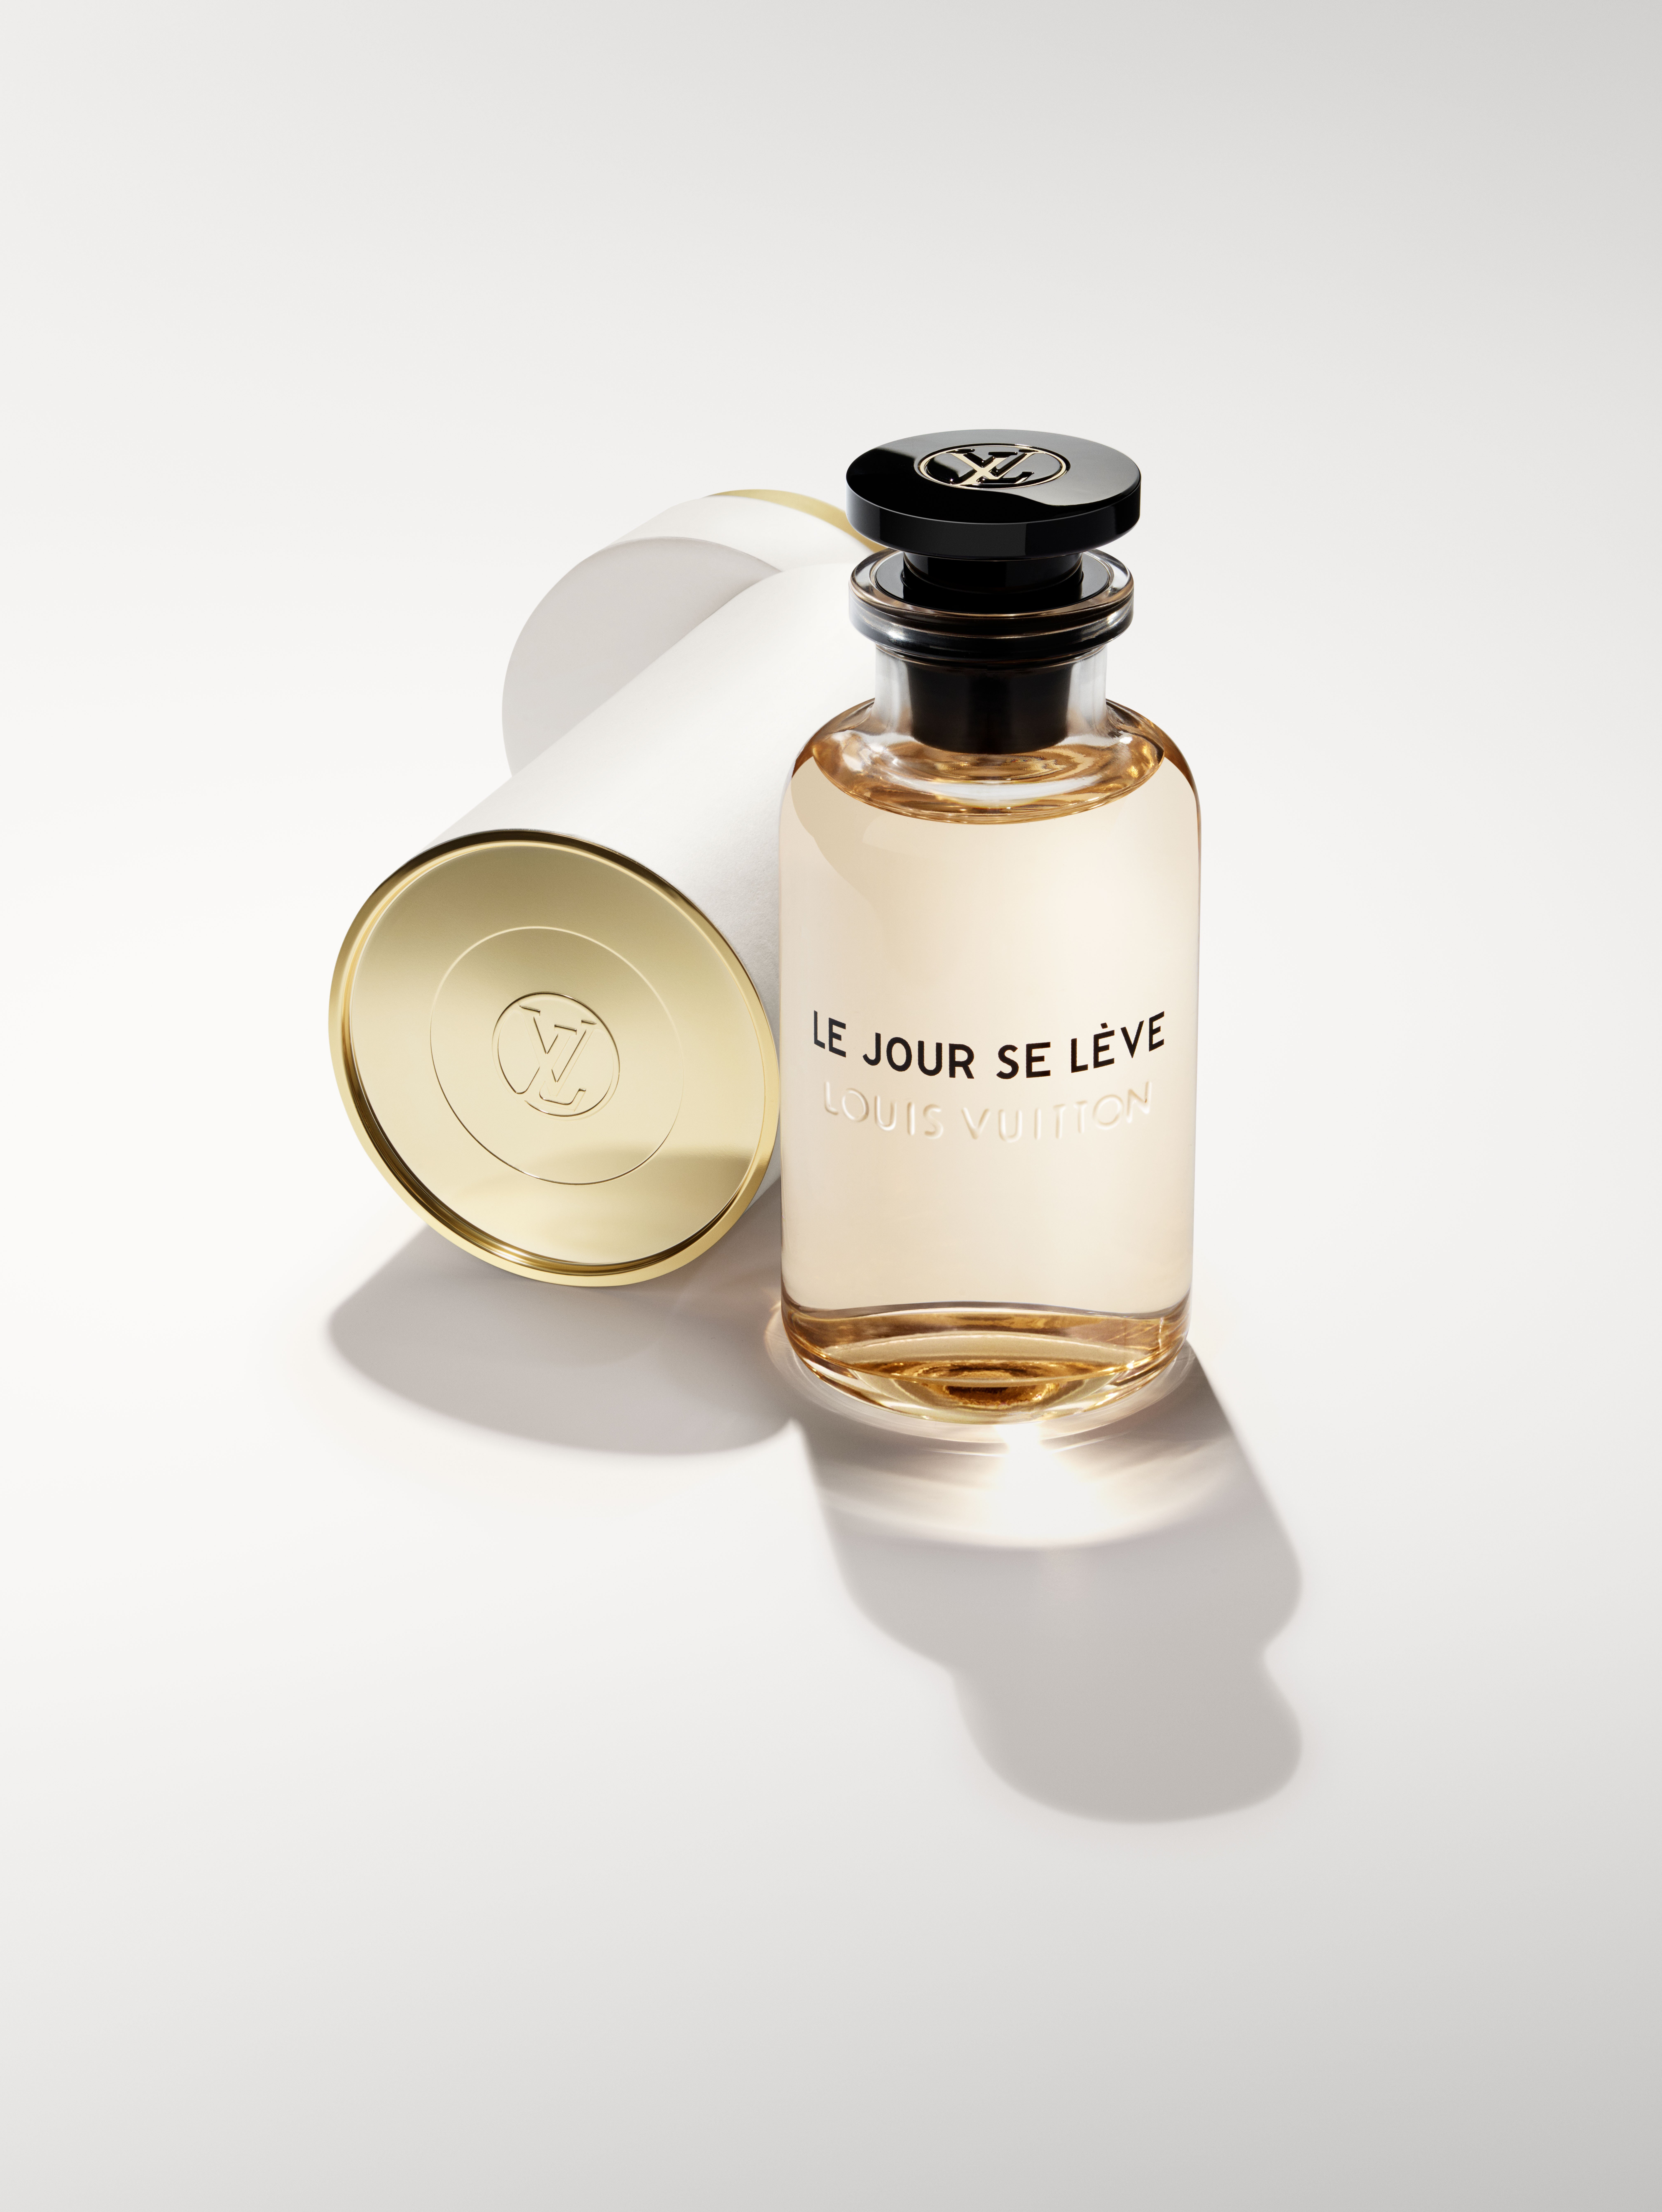 The new Louis Vuitton fragrance, Le Jour se Lève, goes on sale from March 15.